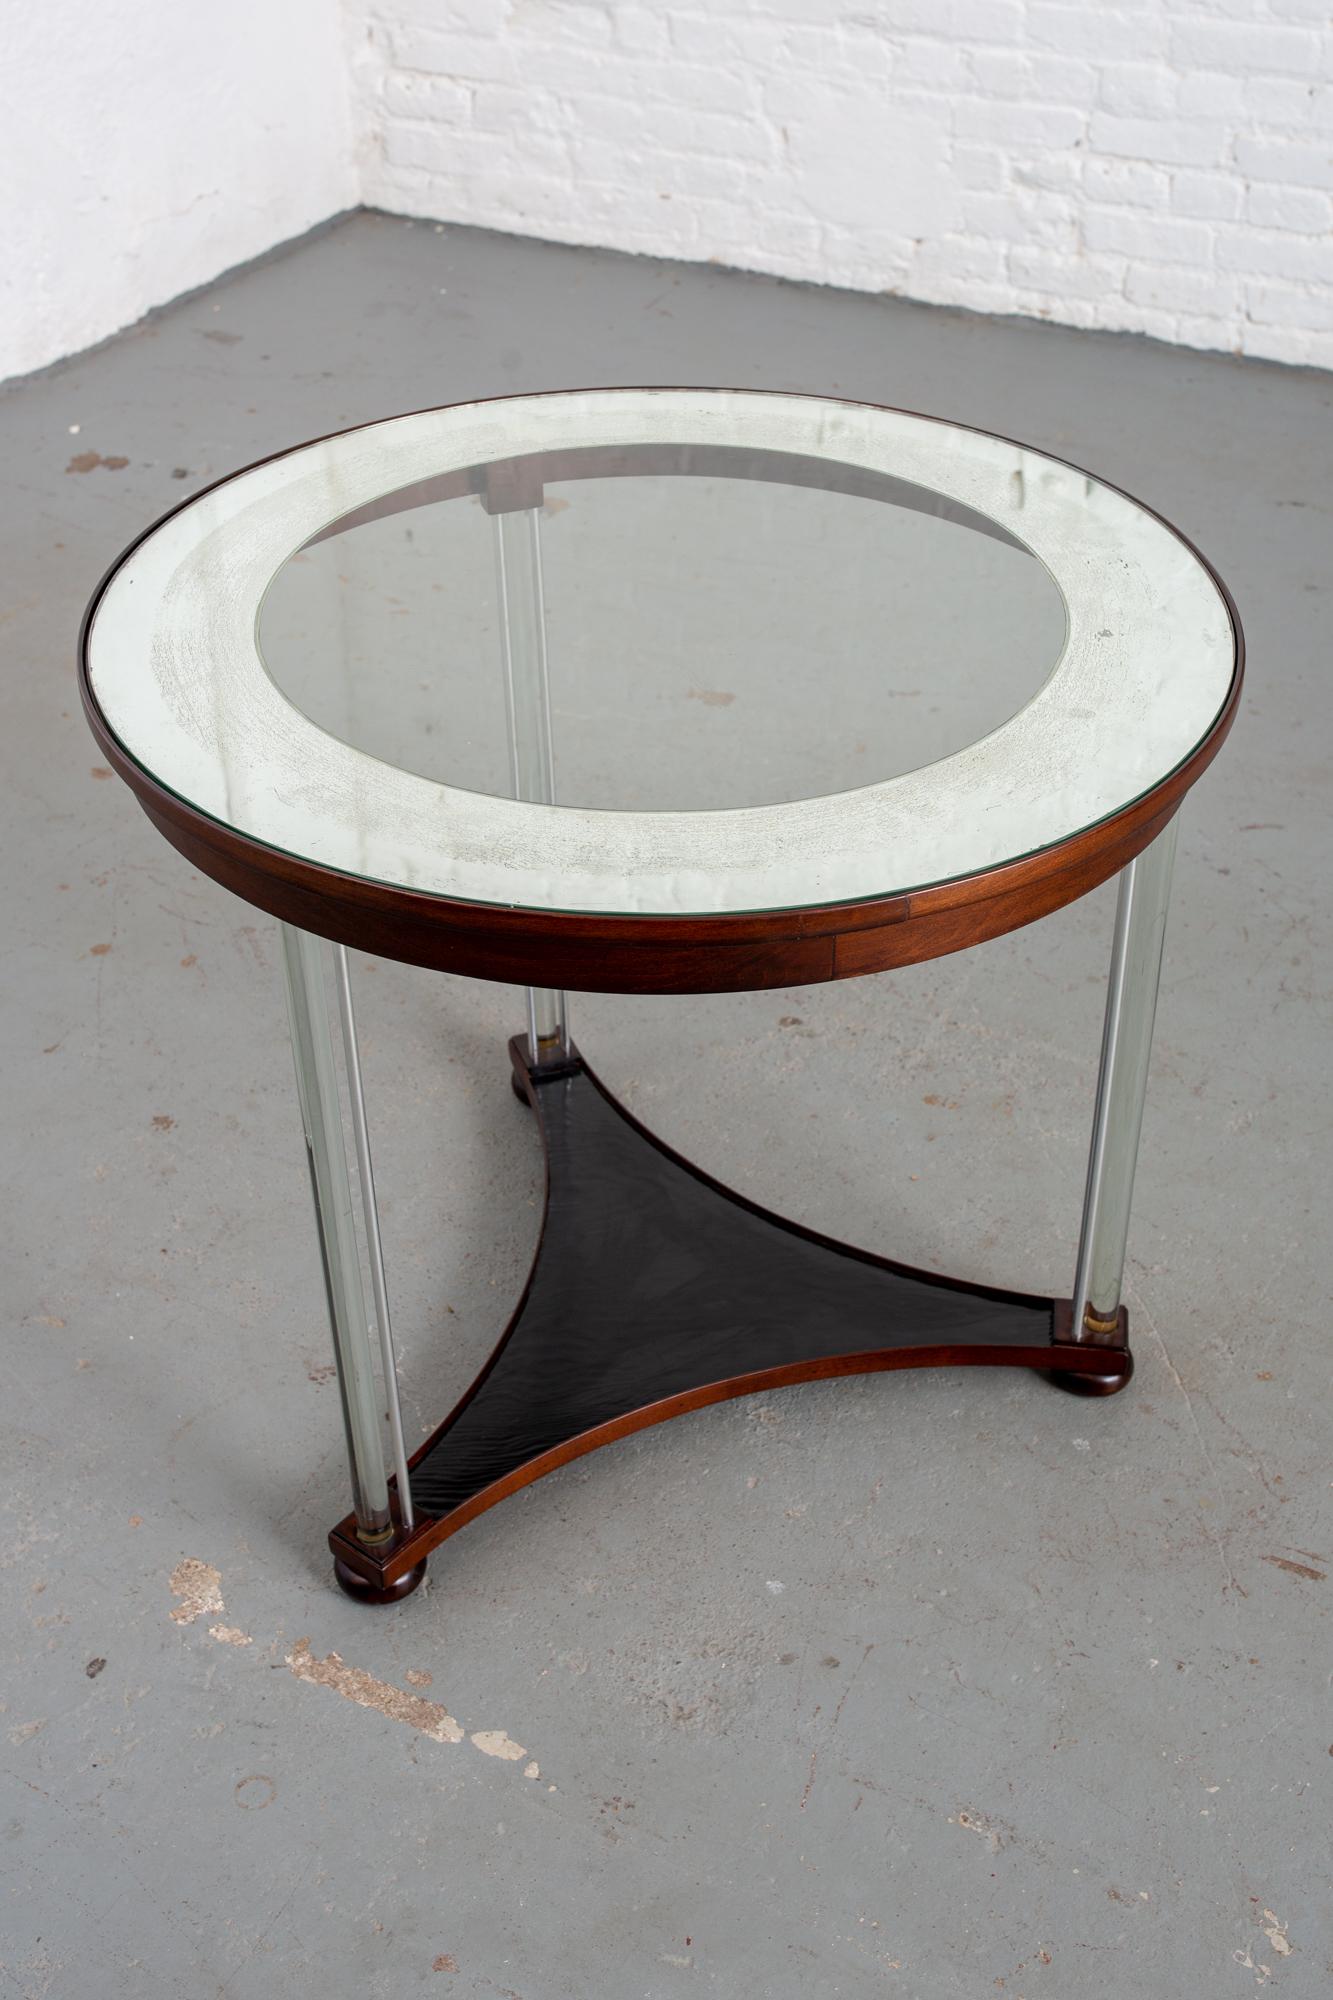 Round Art Deco American 1950s glass top table with glass legs and painted base. Table has very unique and beautiful glass legs that are reinforced by steel rods. Antique mirror top edged with distressed silver leaf. Mahogany wood base in espresso